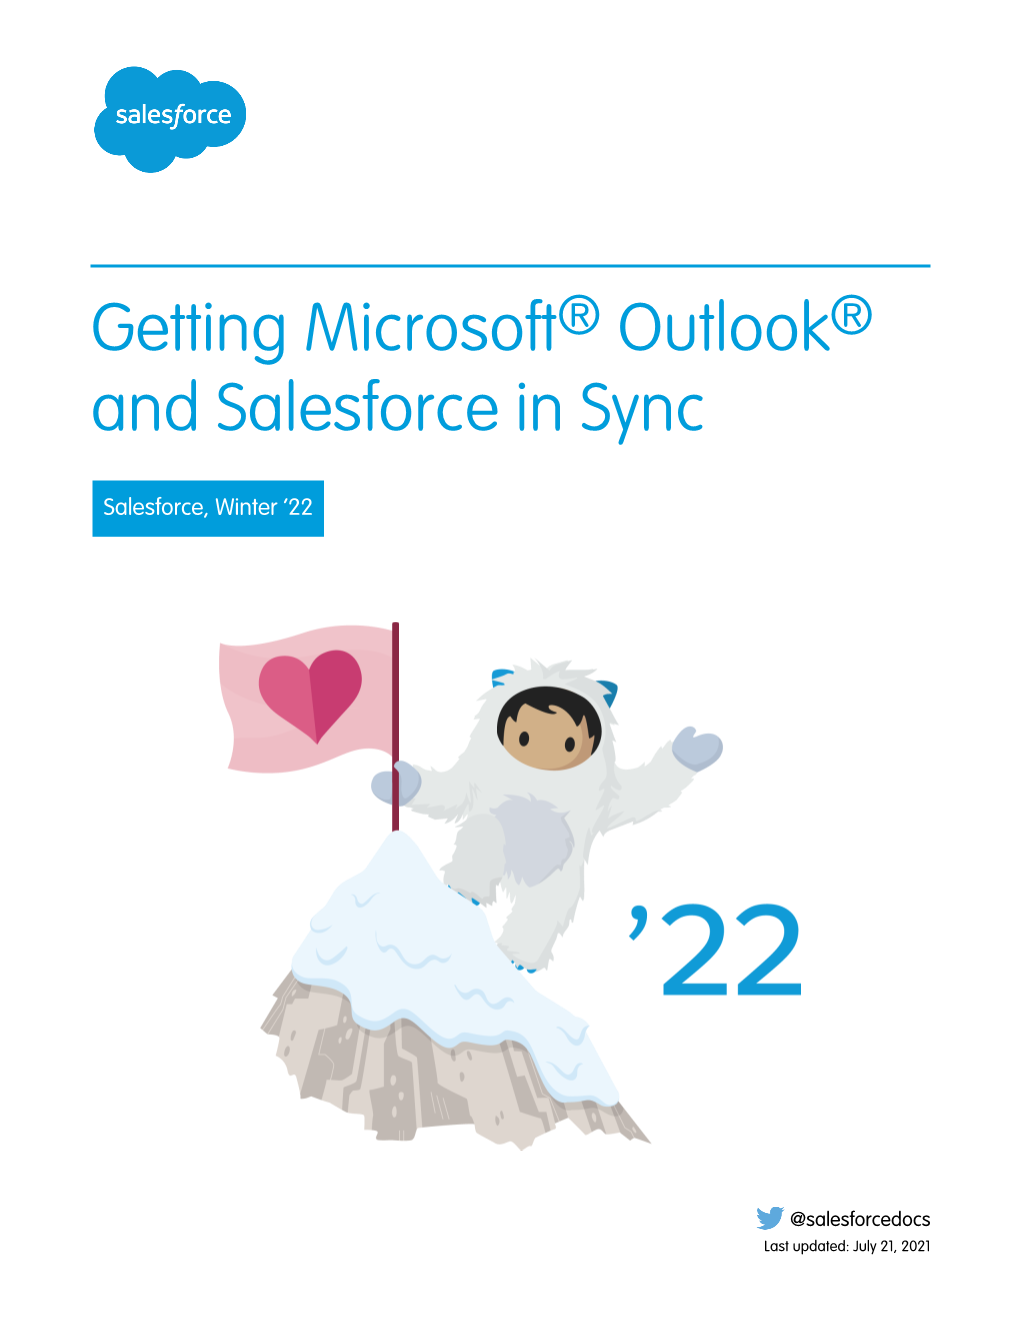 Getting Microsoft® Outlook® and Salesforce in Sync